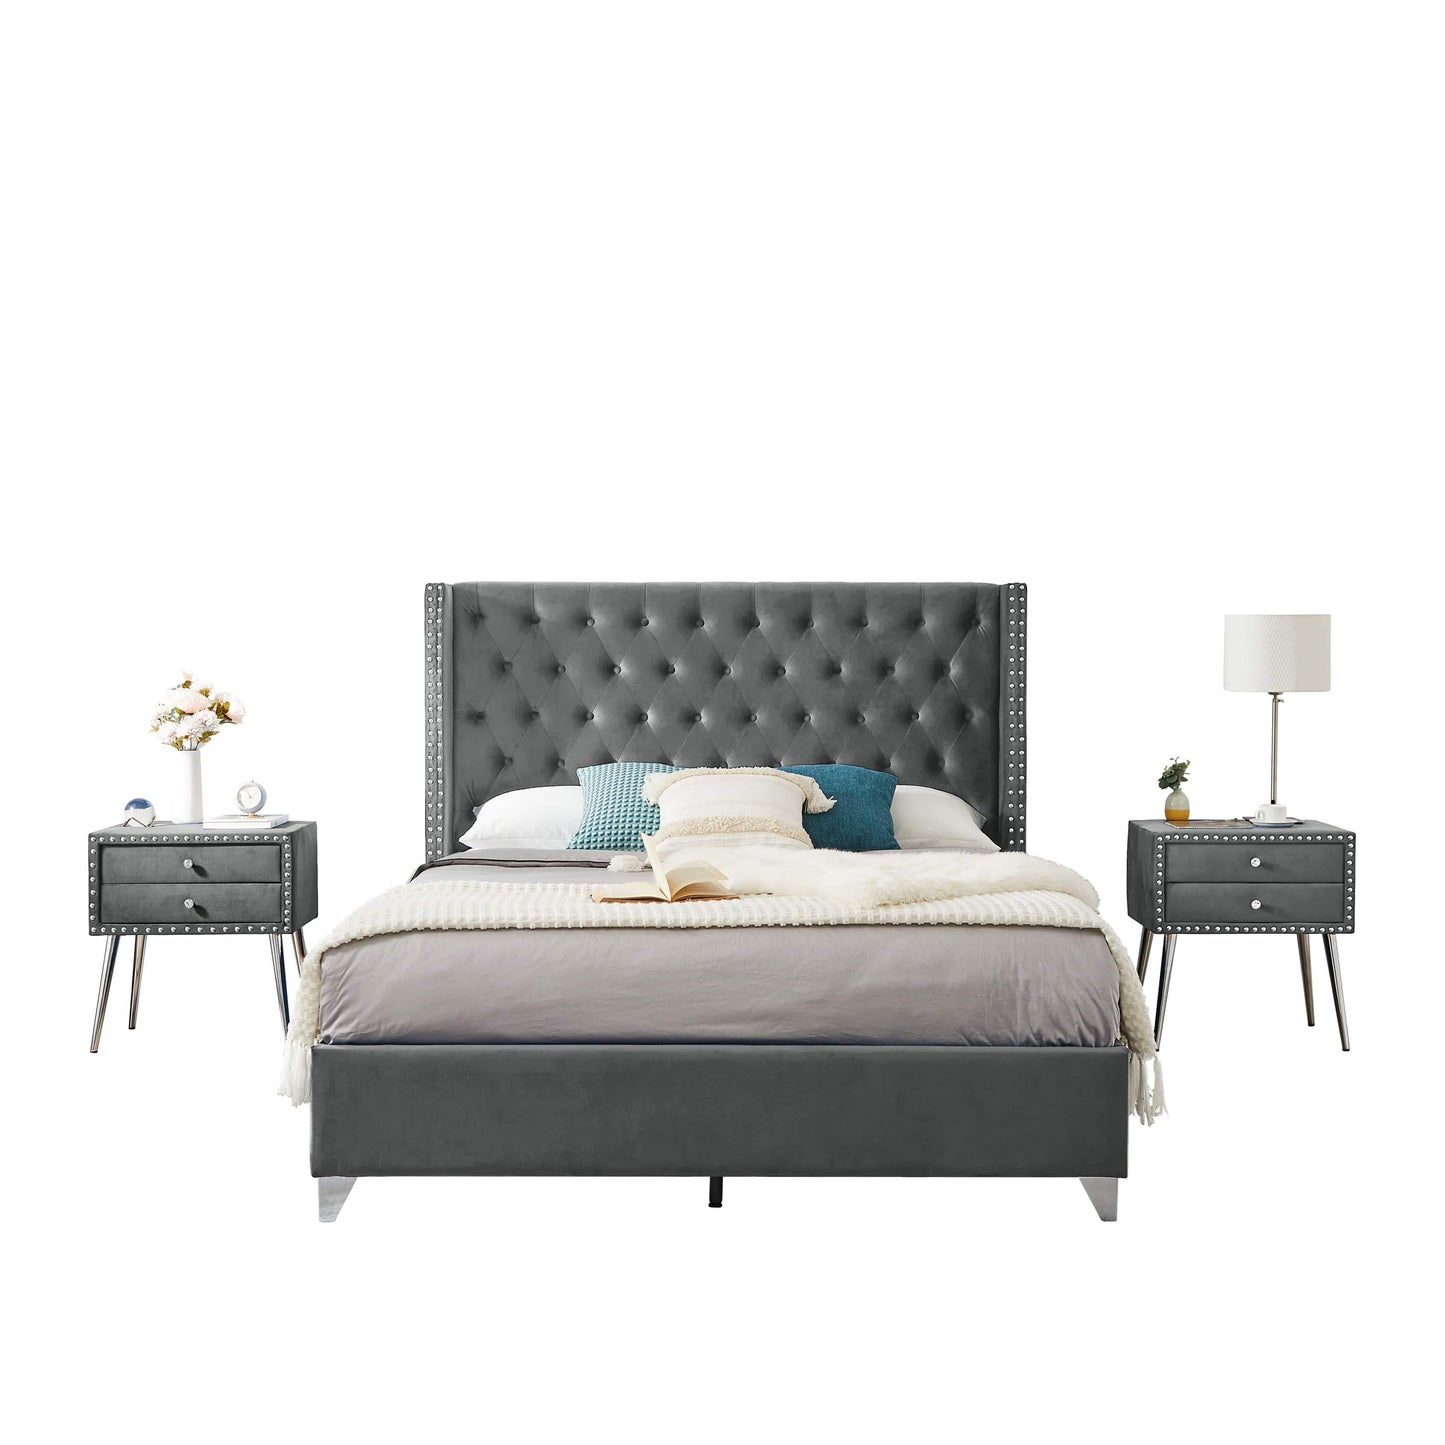 B100S Queen bed with two nightstands, Button designed Headboard,strong wooden slats + metal legs with Electroplate